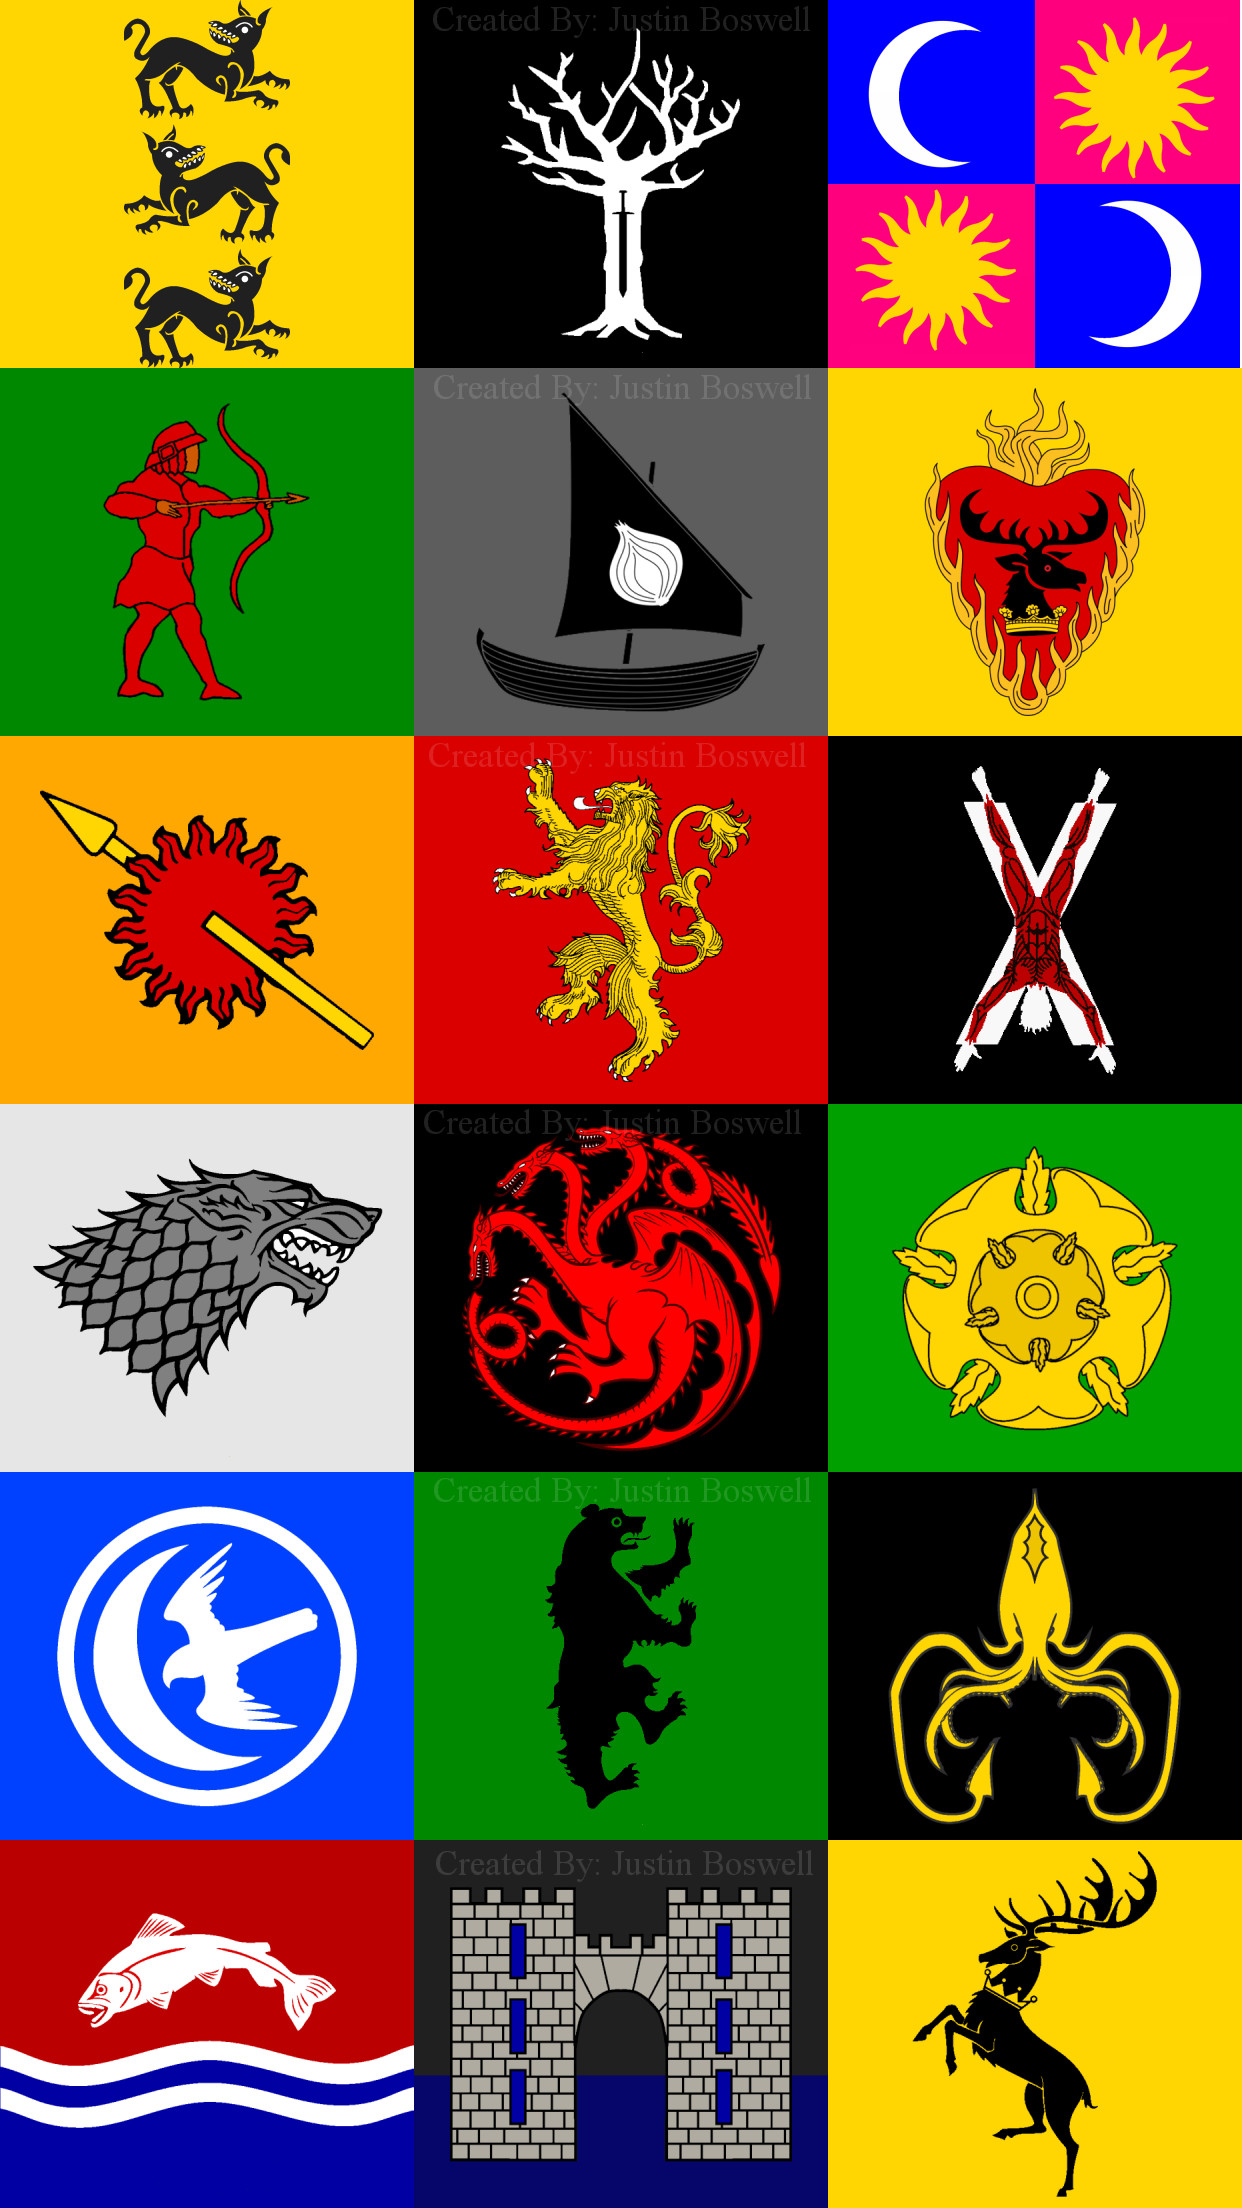 1242x2208 Game of Thrones iPhone 7 plus with Border House Sigil Wallpaper Houses  Clegane Forrester, Tarth Tarly Seaworth Baratheon Martell Lannister Bolton  Stark ...